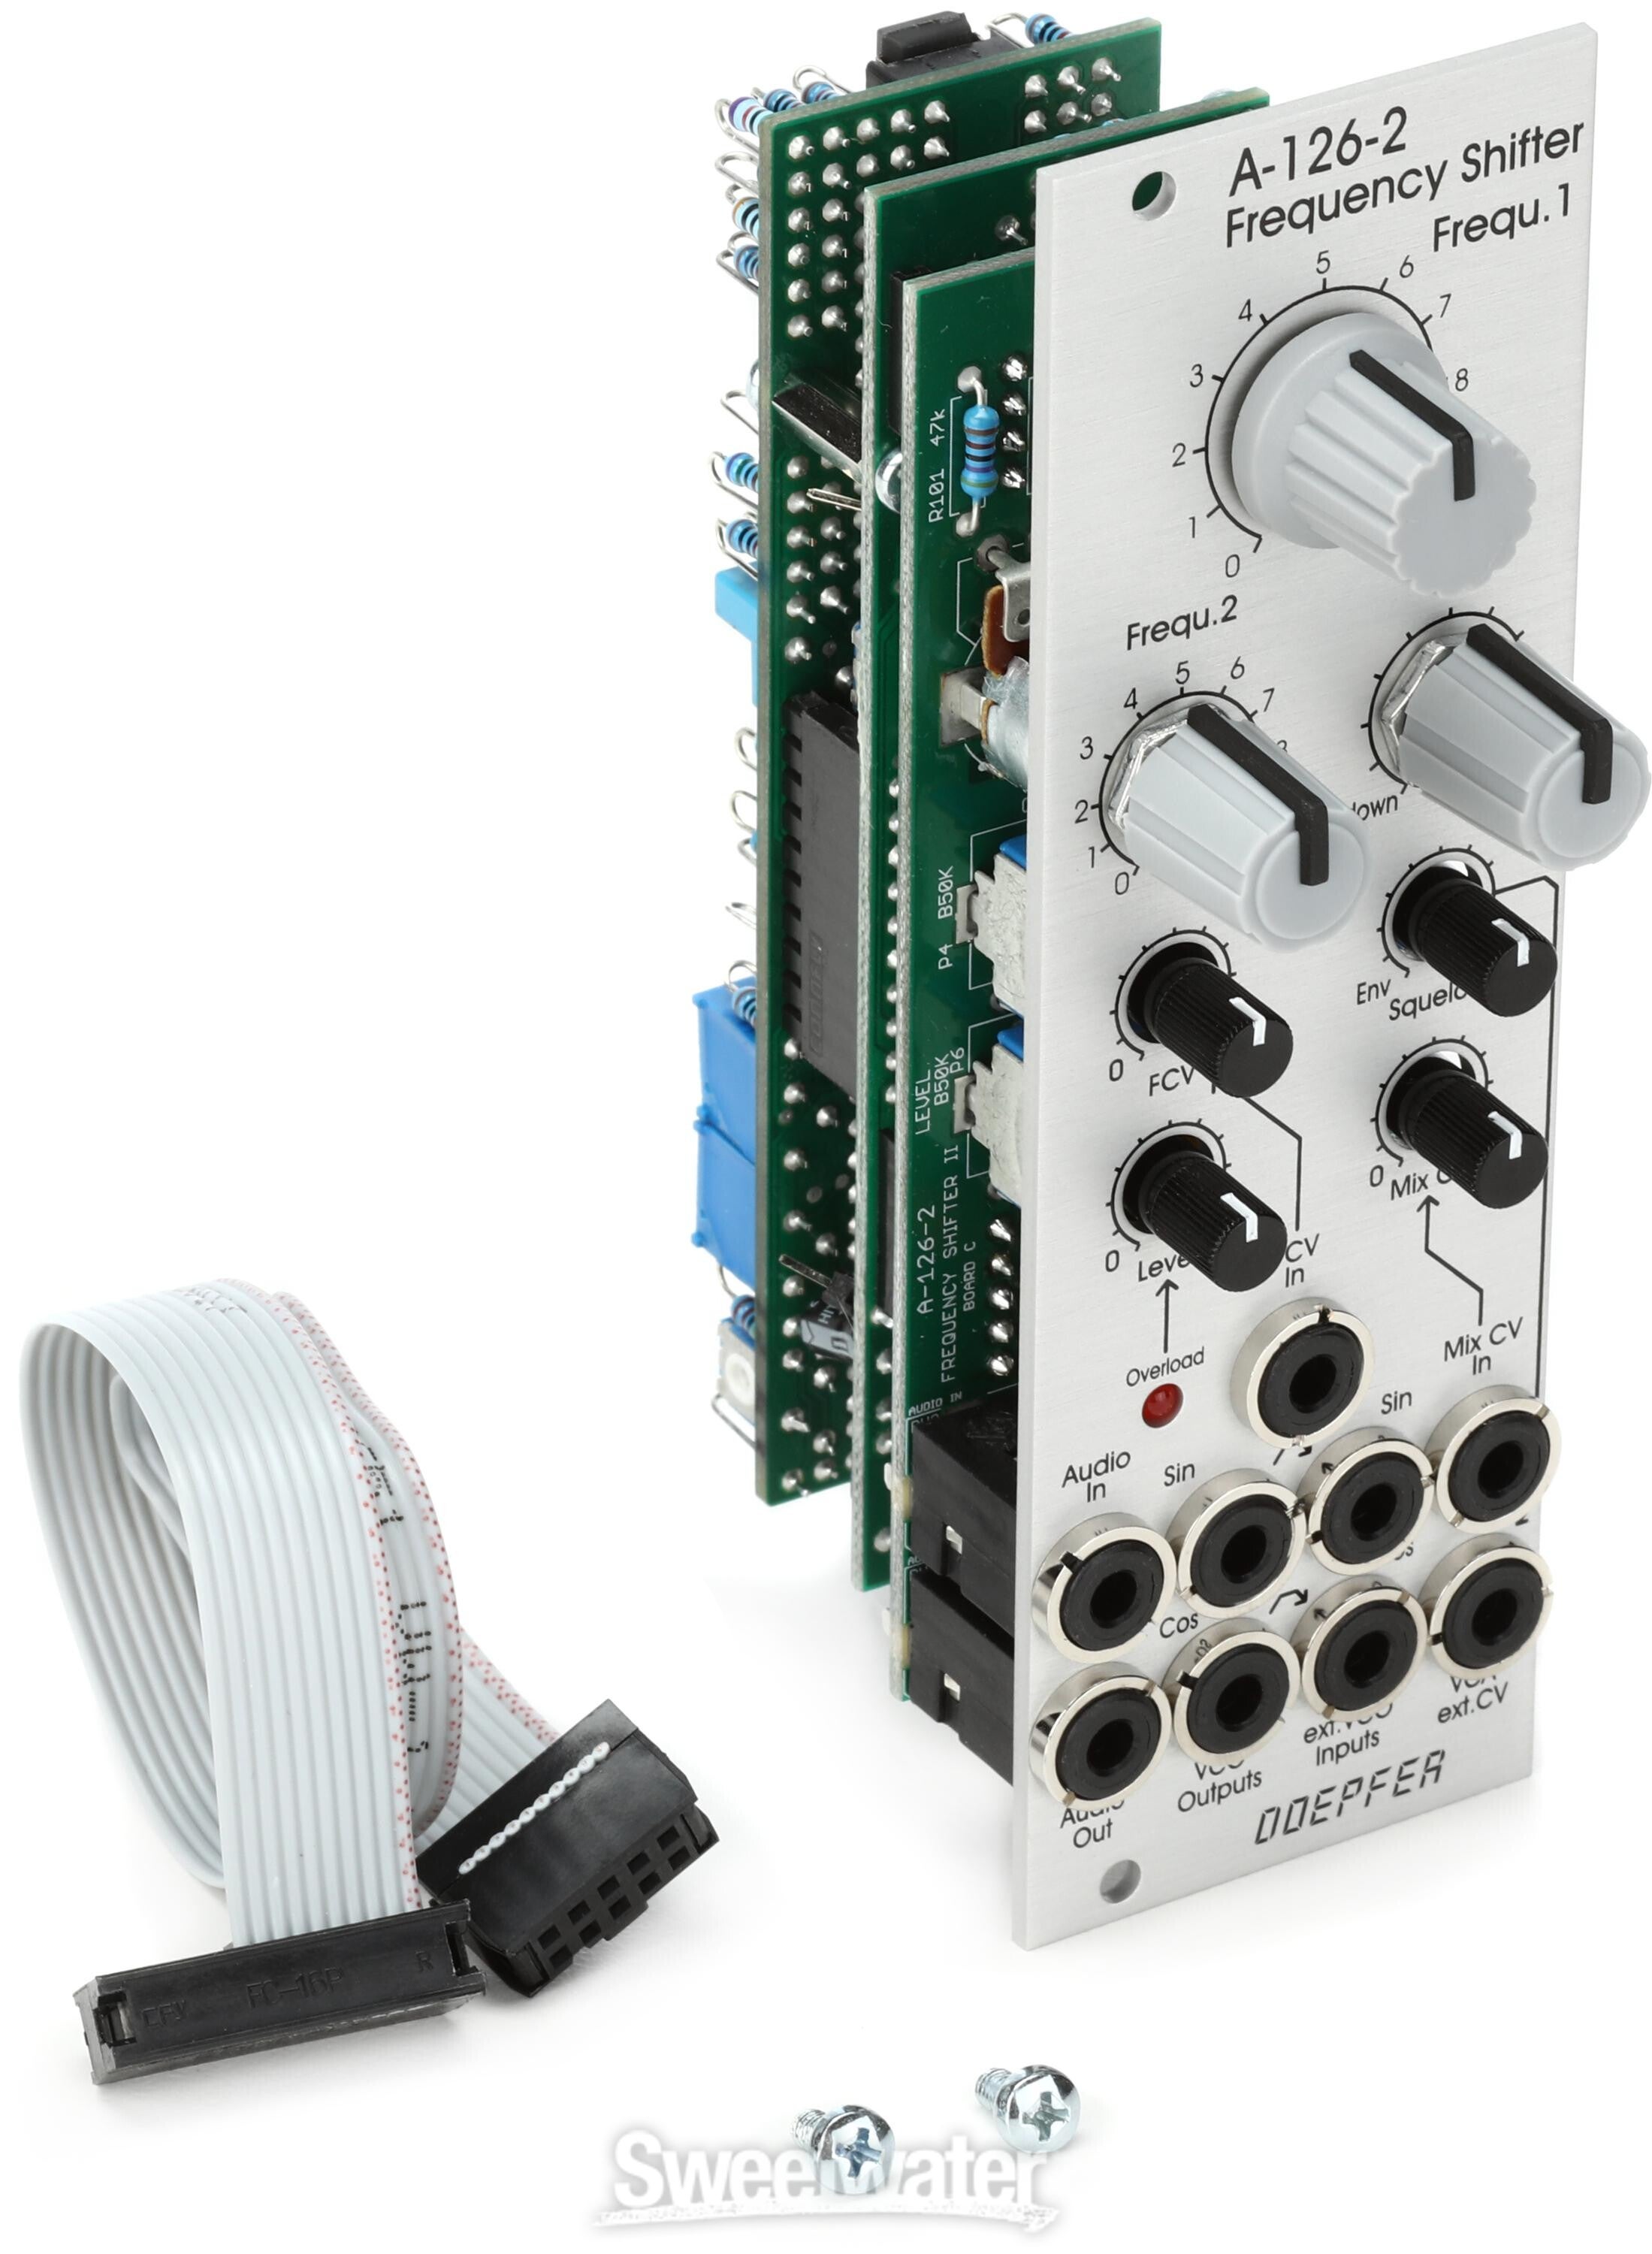 A-126-2 Voltage-controlled Frequency Shifter II Eurorack Module 